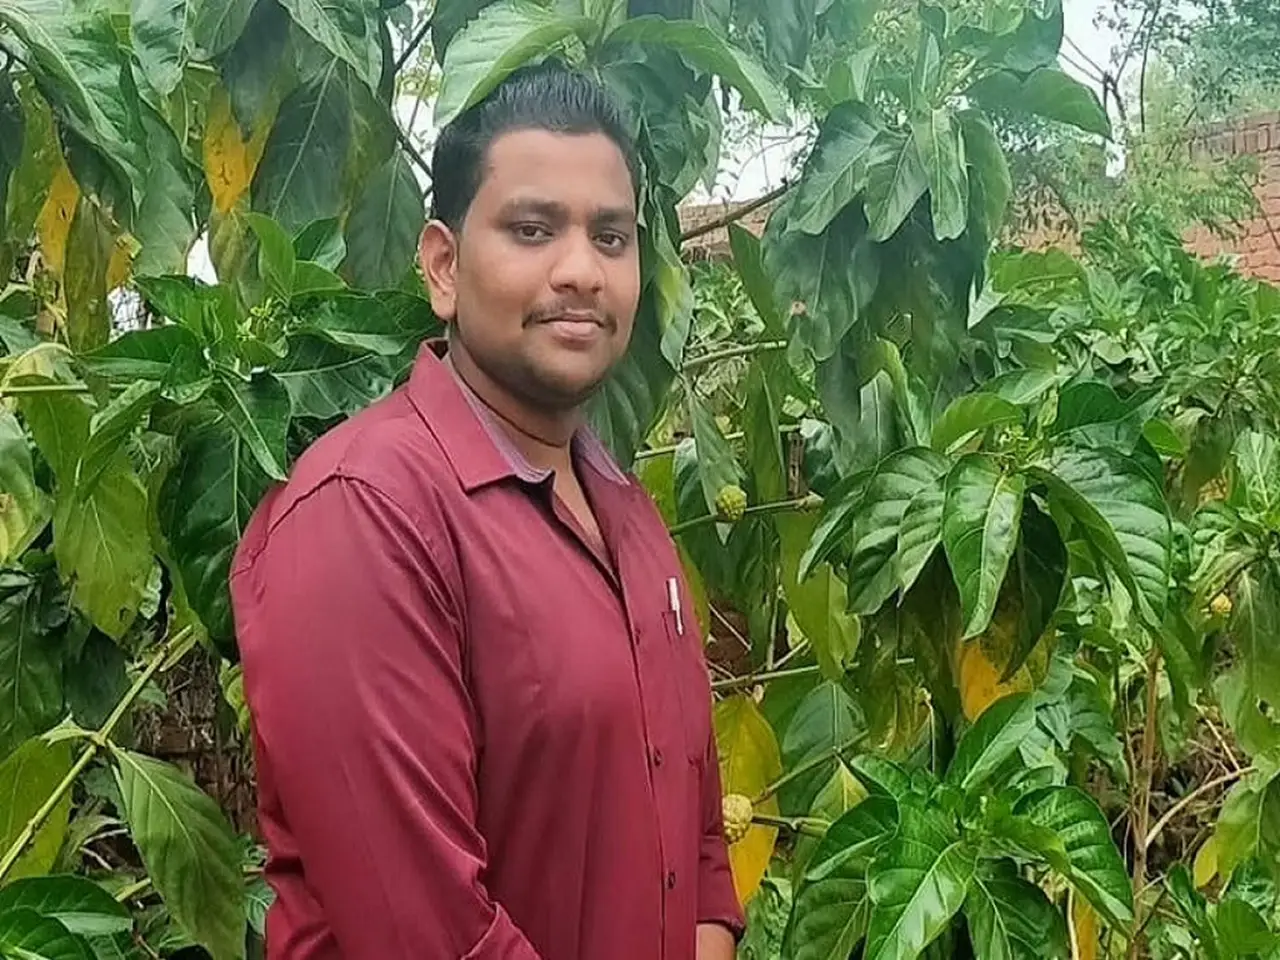 In Bokaro, Jharkhand, 24-year-old Prasenjeet Kumar has demonstrated how indigenous superfruits may change livelihoods by growing 16 noni trees there.